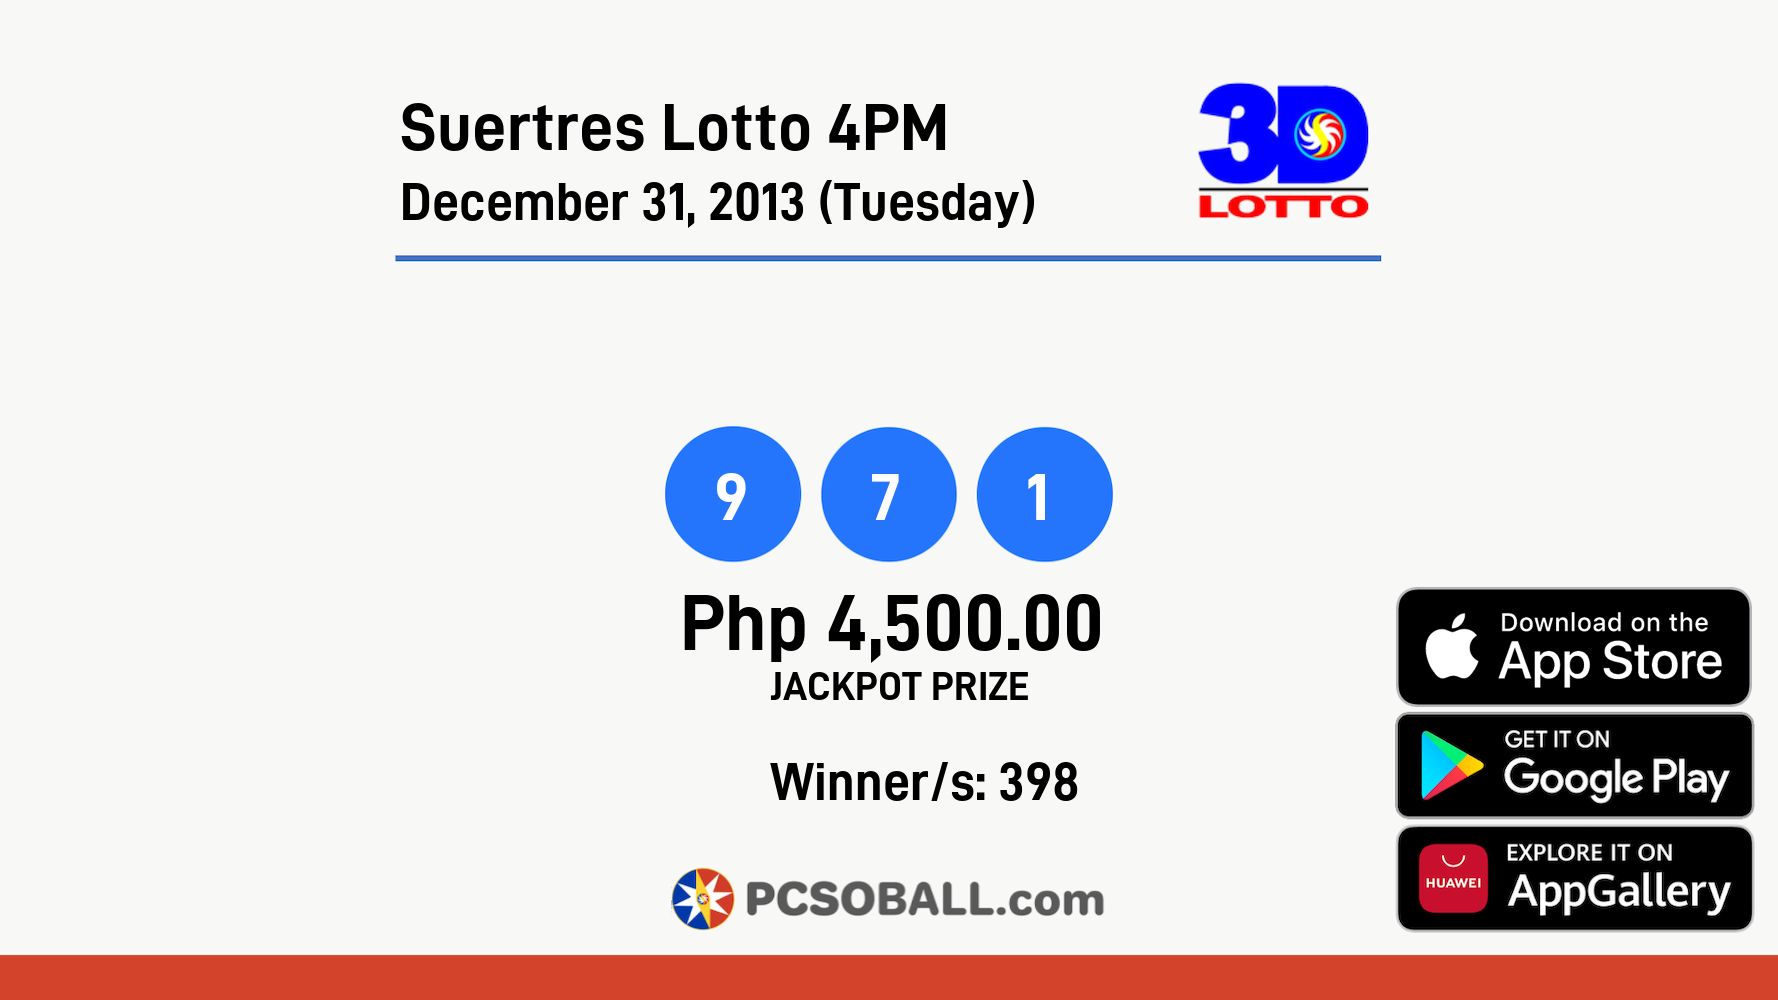 Suertres Lotto 4PM December 31, 2013 (Tuesday) Result